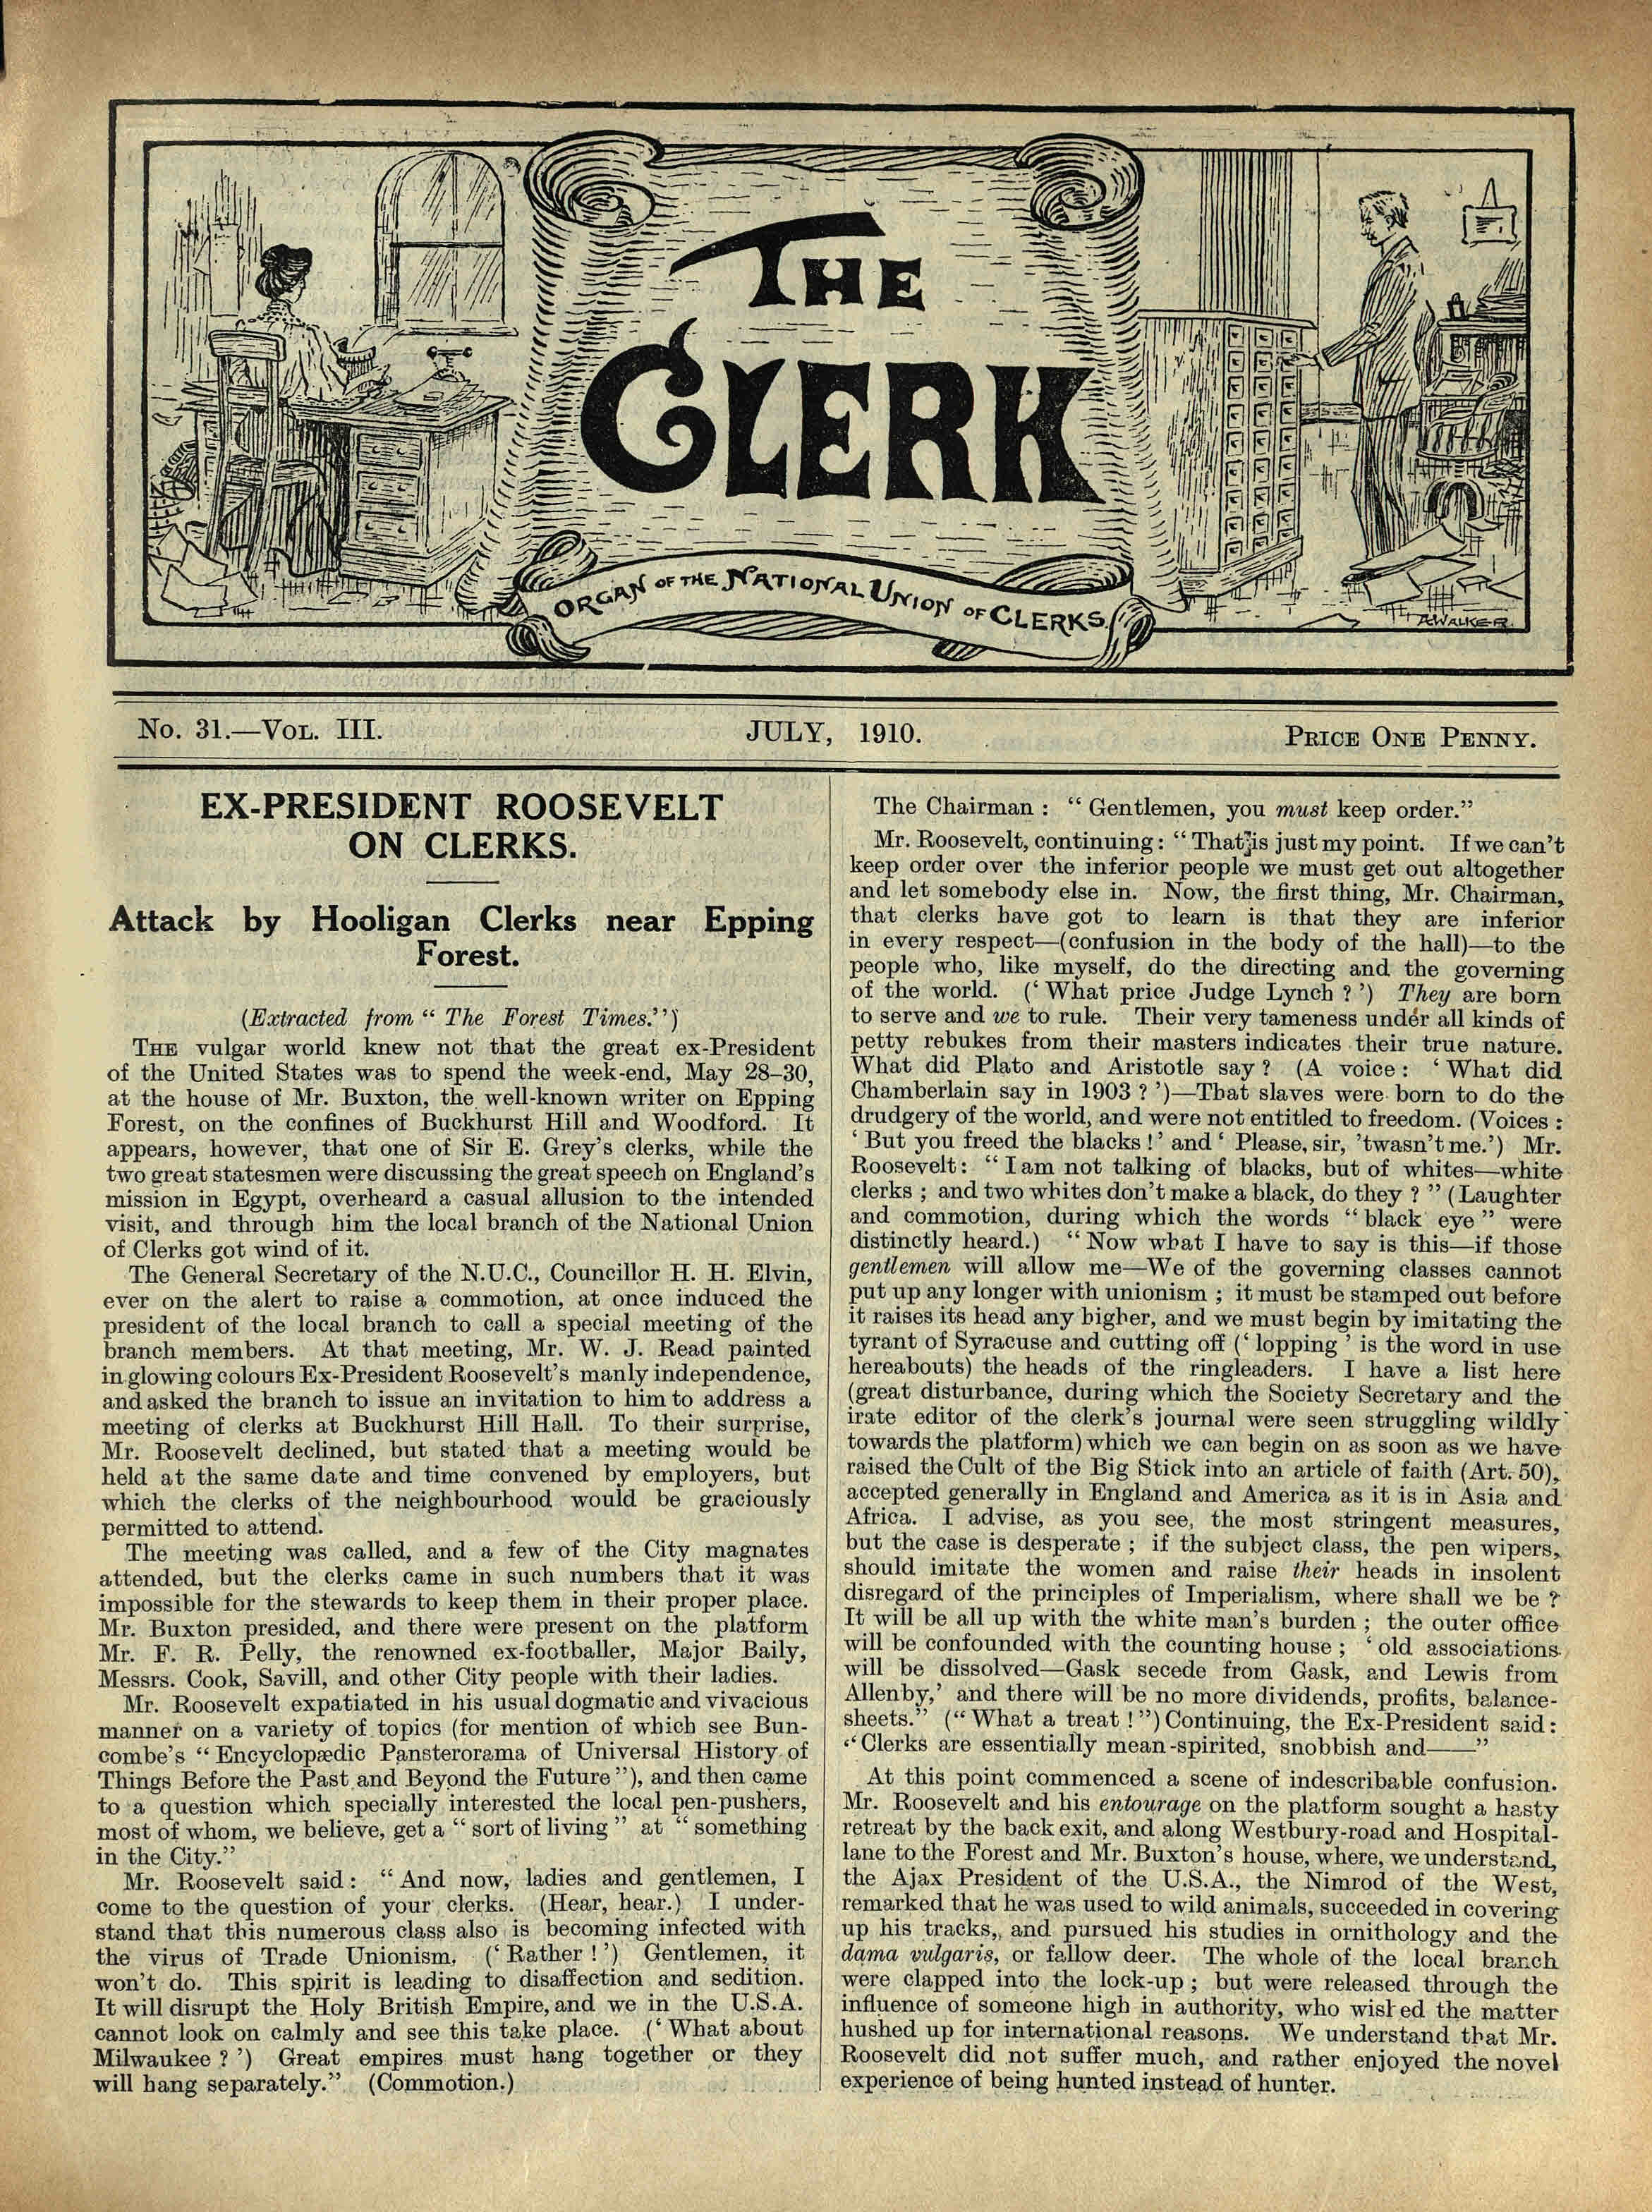 Front page of The Clerk, July 1910